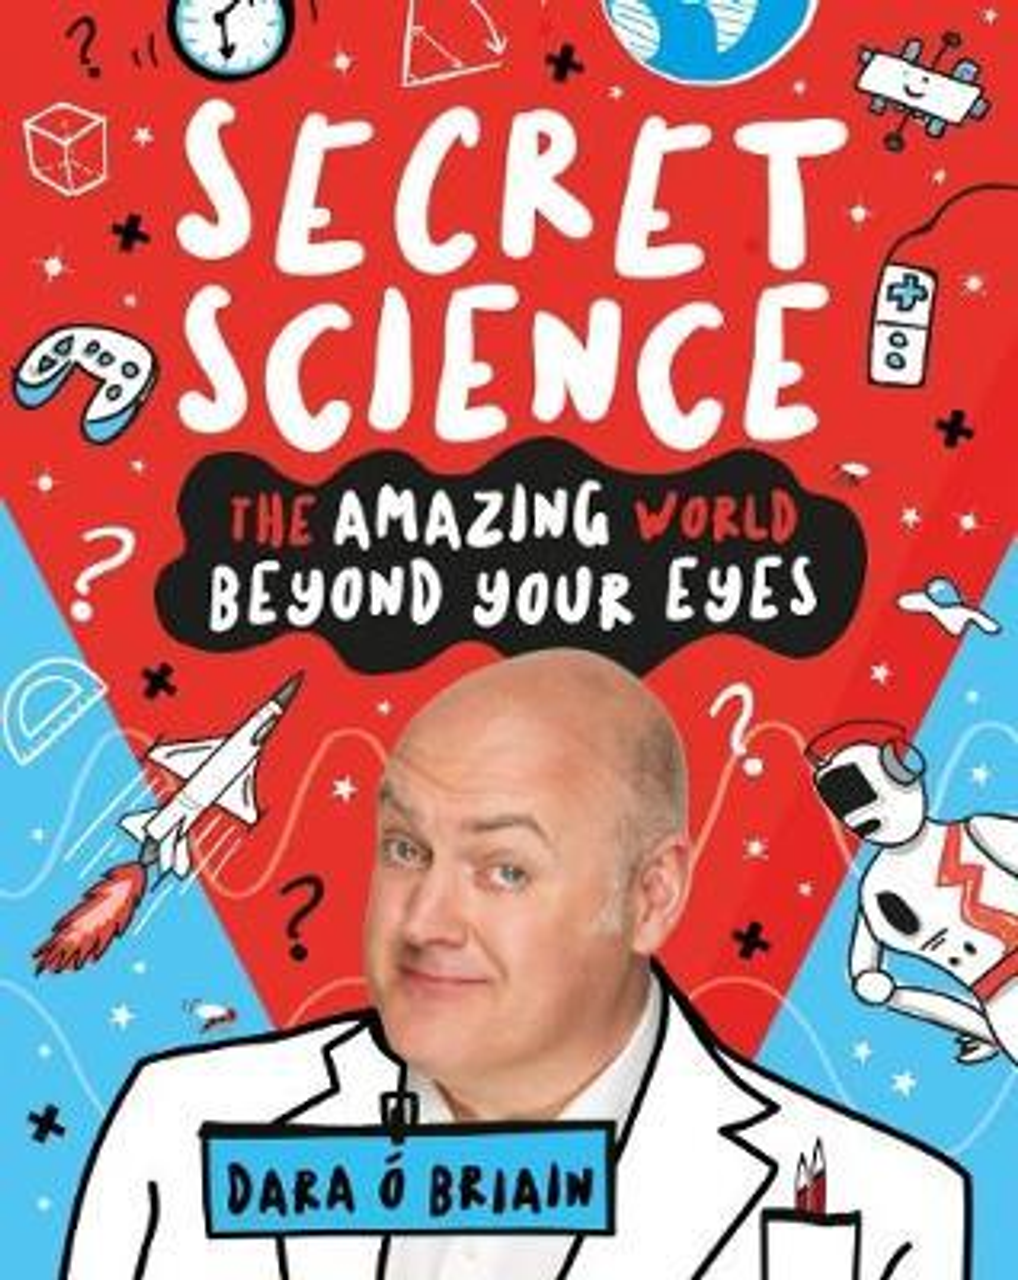 Dara O Briain / Secret Science : the Amazing World Beyond Your Eyes (Large Paperback)